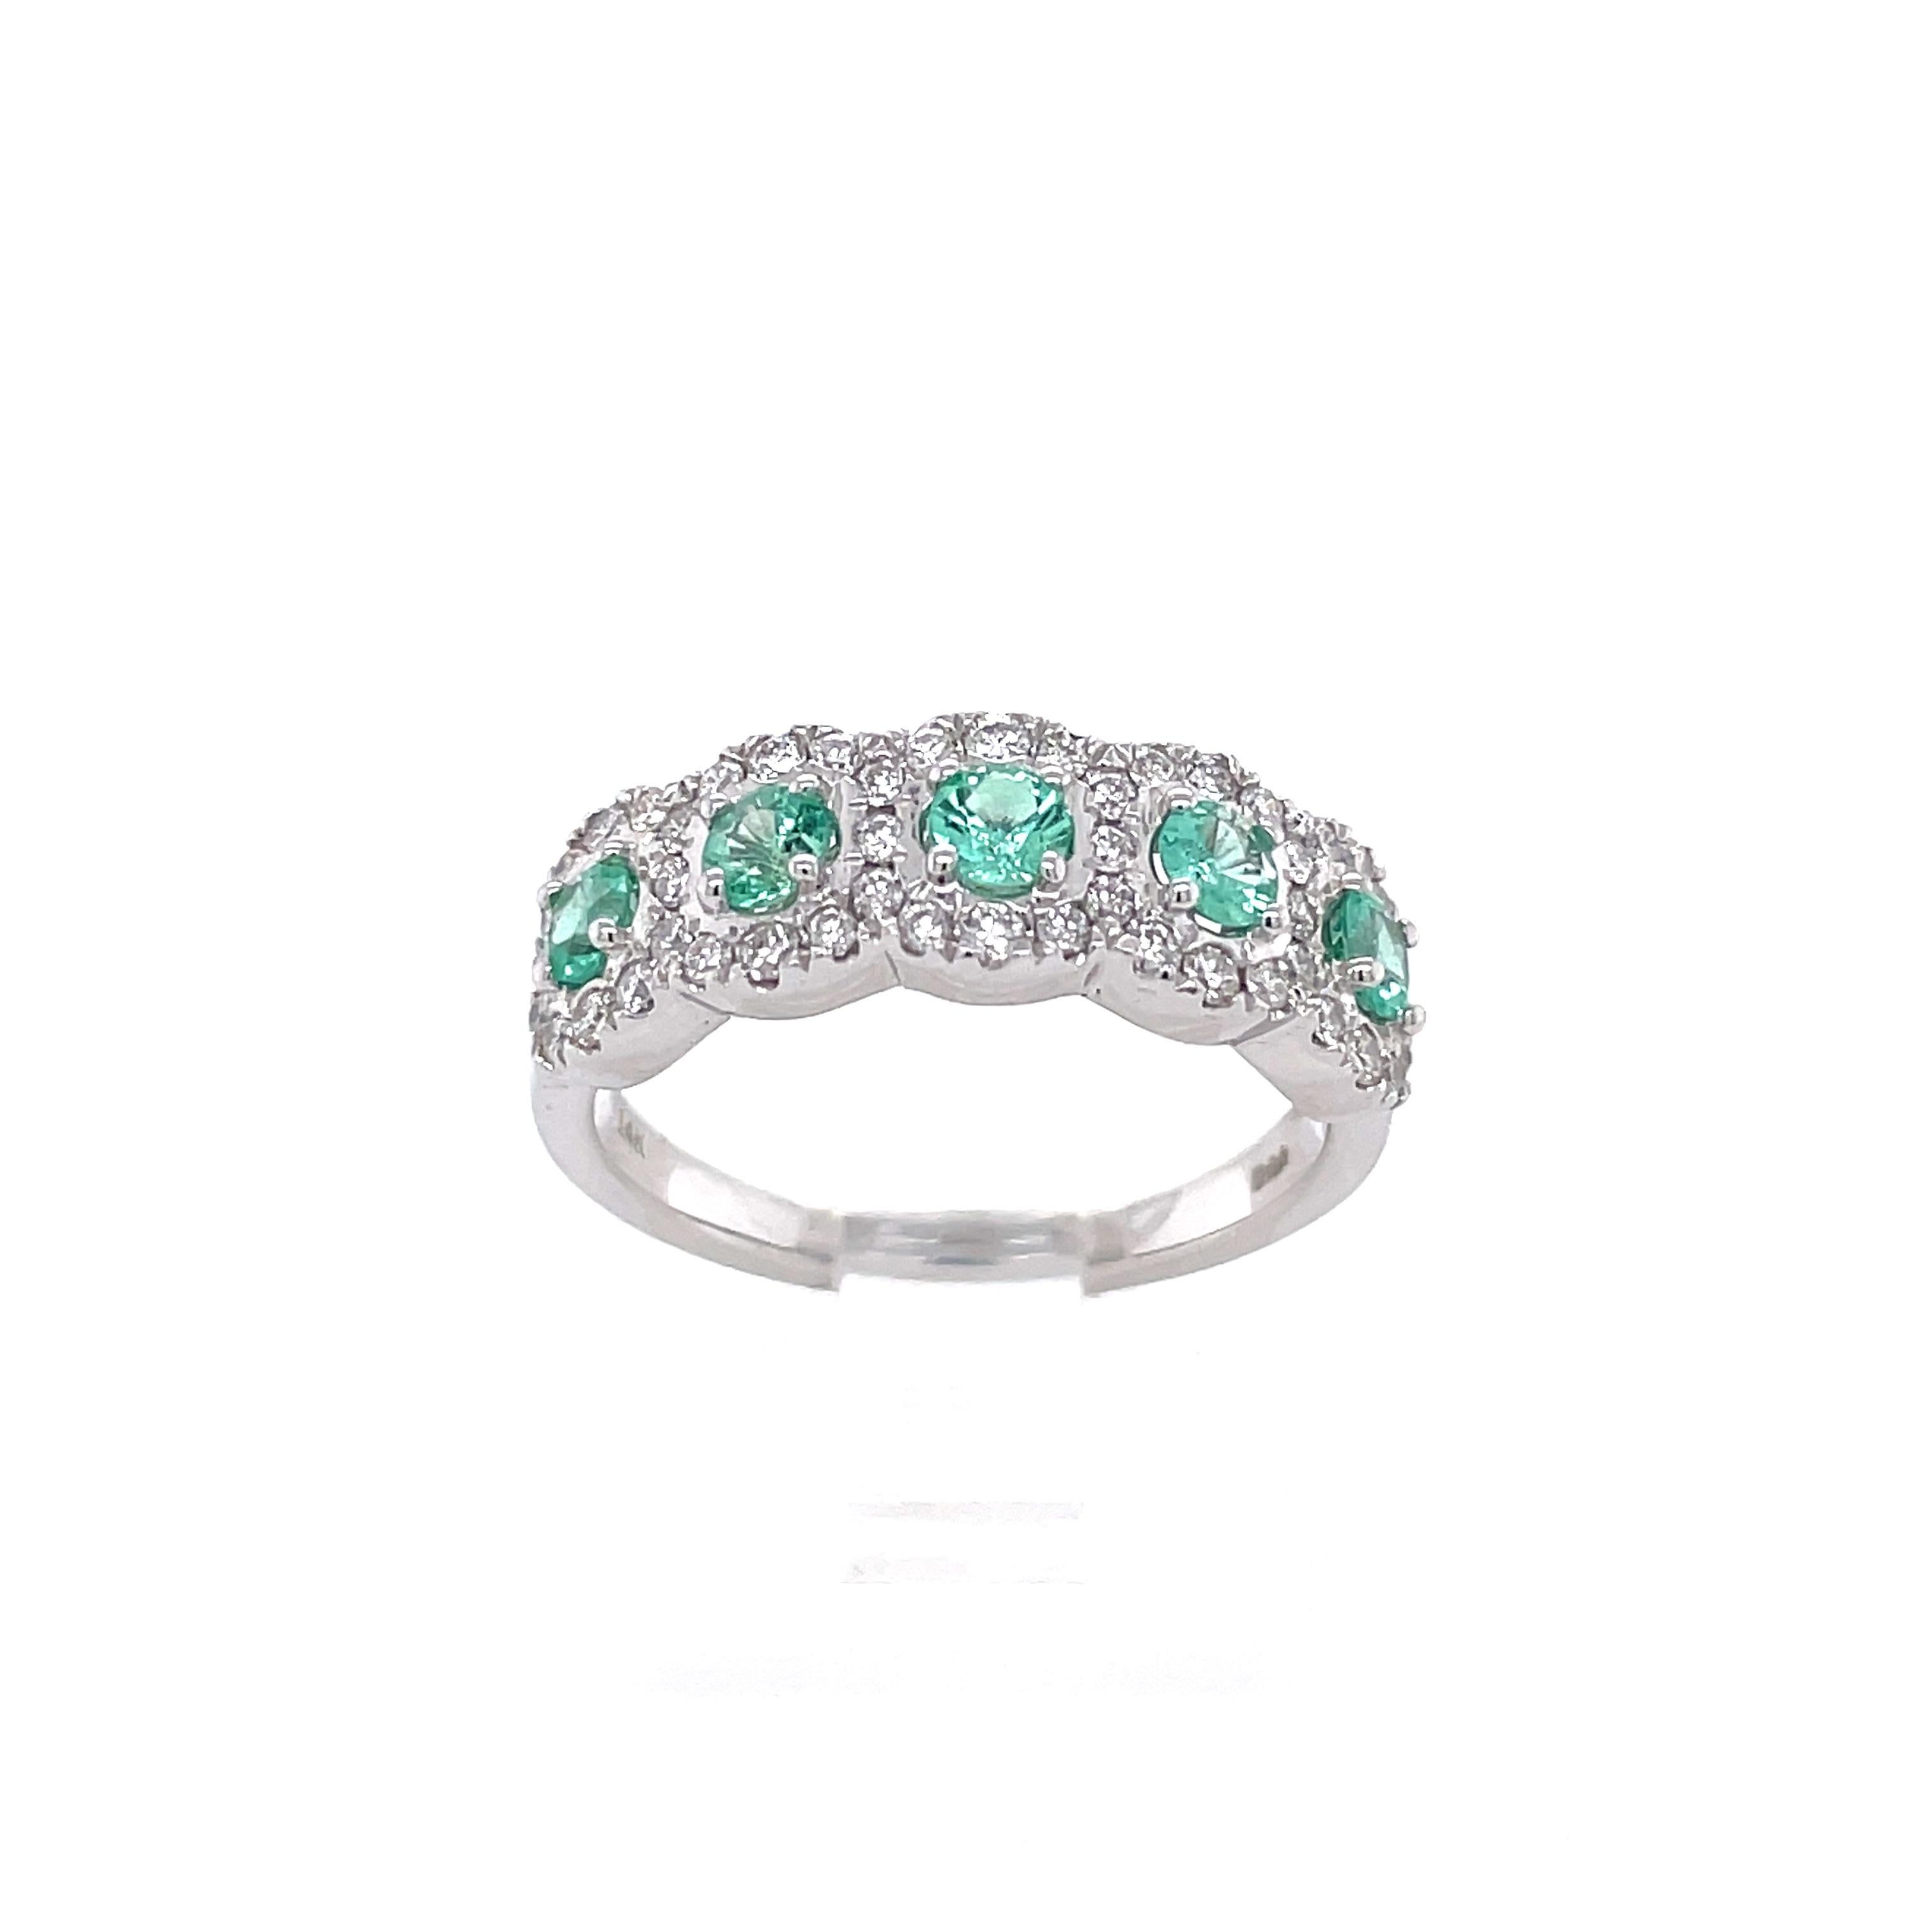 A stunning cocktail ring crafted in 14 karat white gold with 5 round natural translucent emeralds weighing 0.50 cttw. The measurements for these stones are approx 3 x 3 x 2 mm. This ring also contains 48 natural round brilliant diamonds weighing